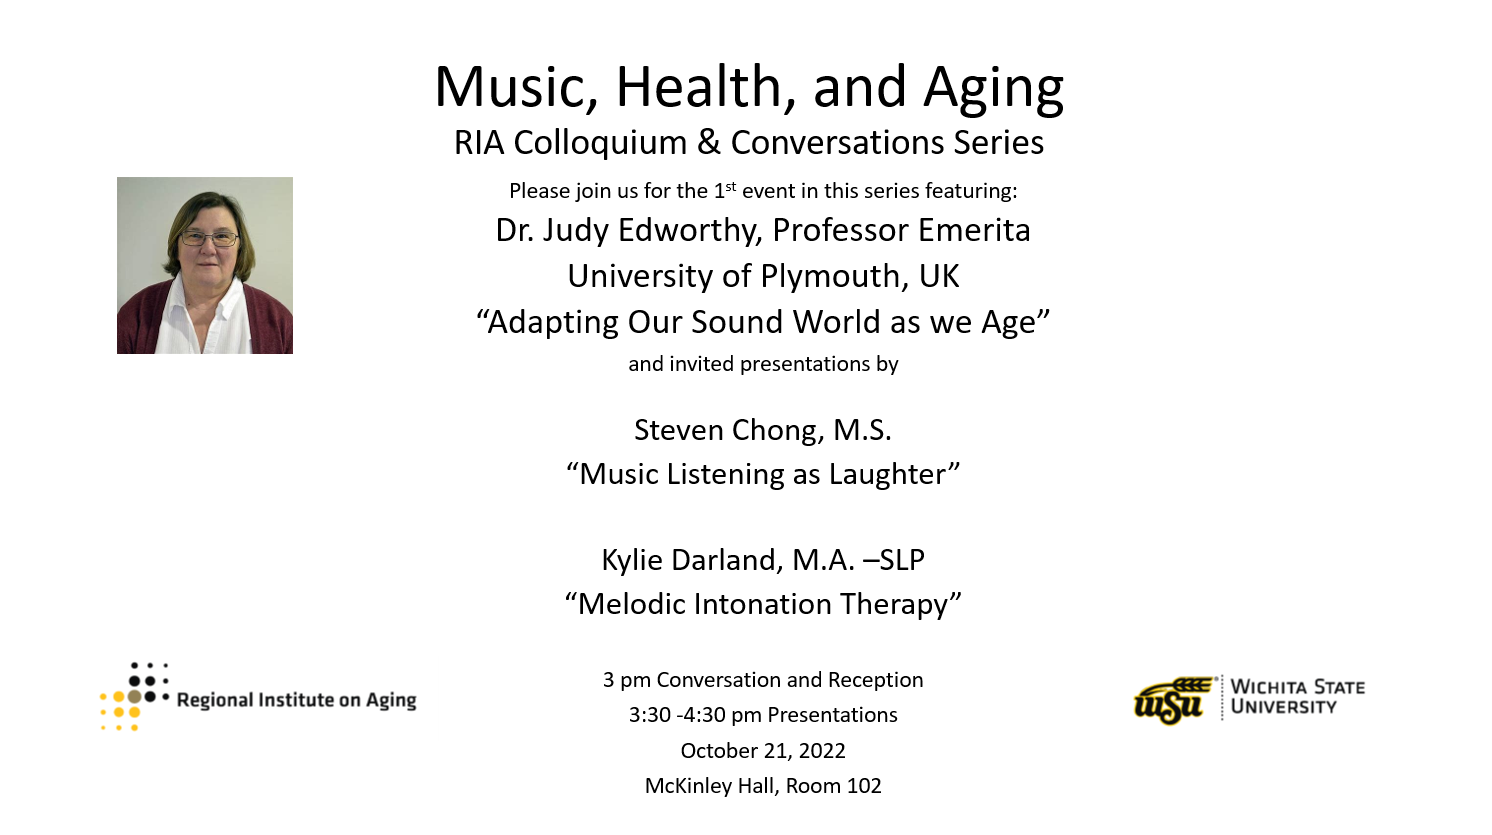 Music , health, and aging event details. 